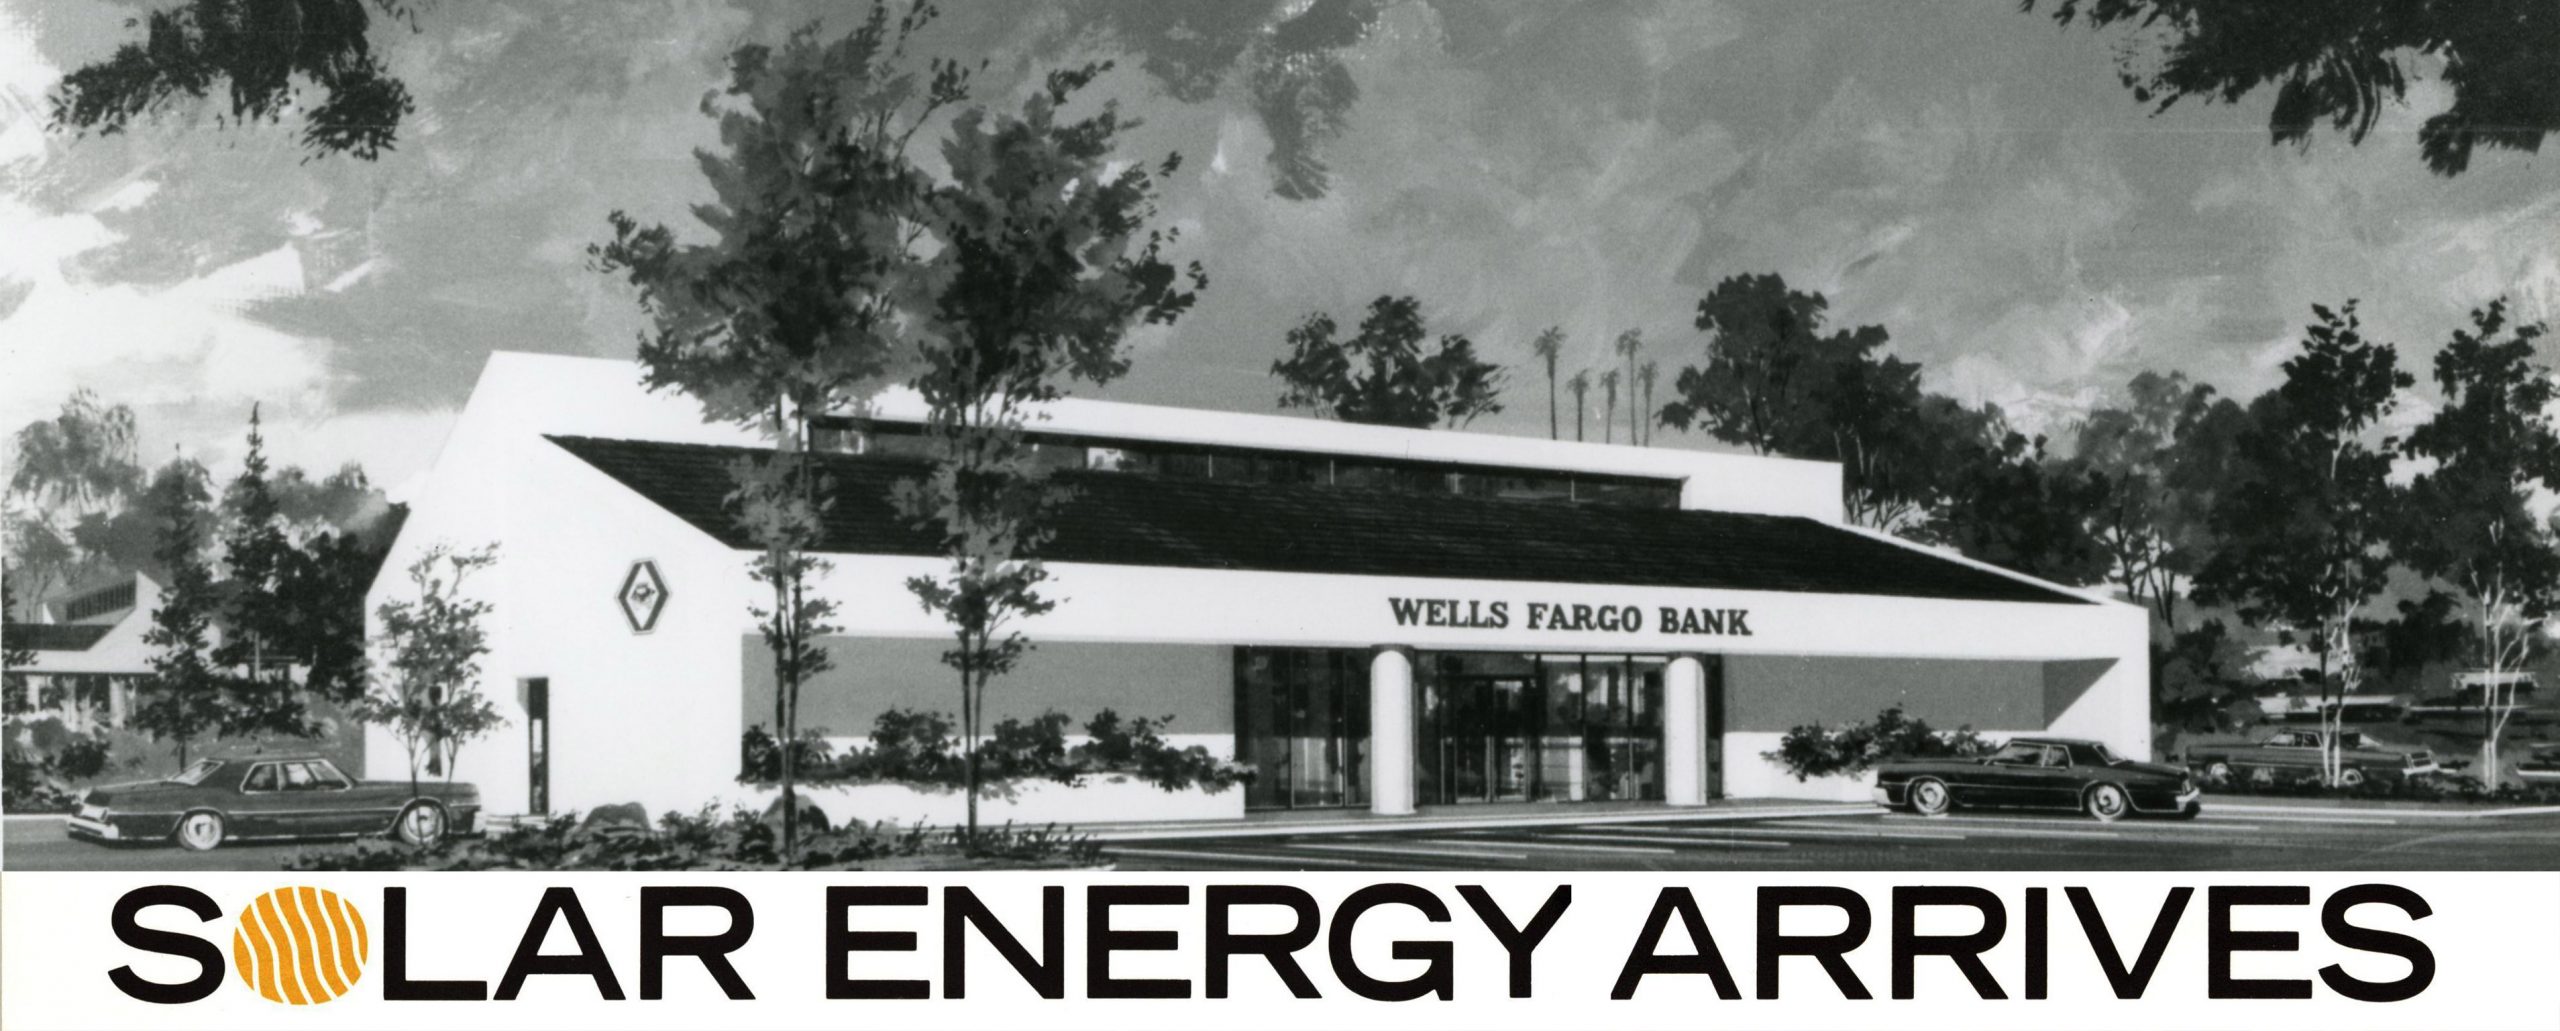 Illustration of a Wells Fargo branch building. Solar panels are visible on a canopy.